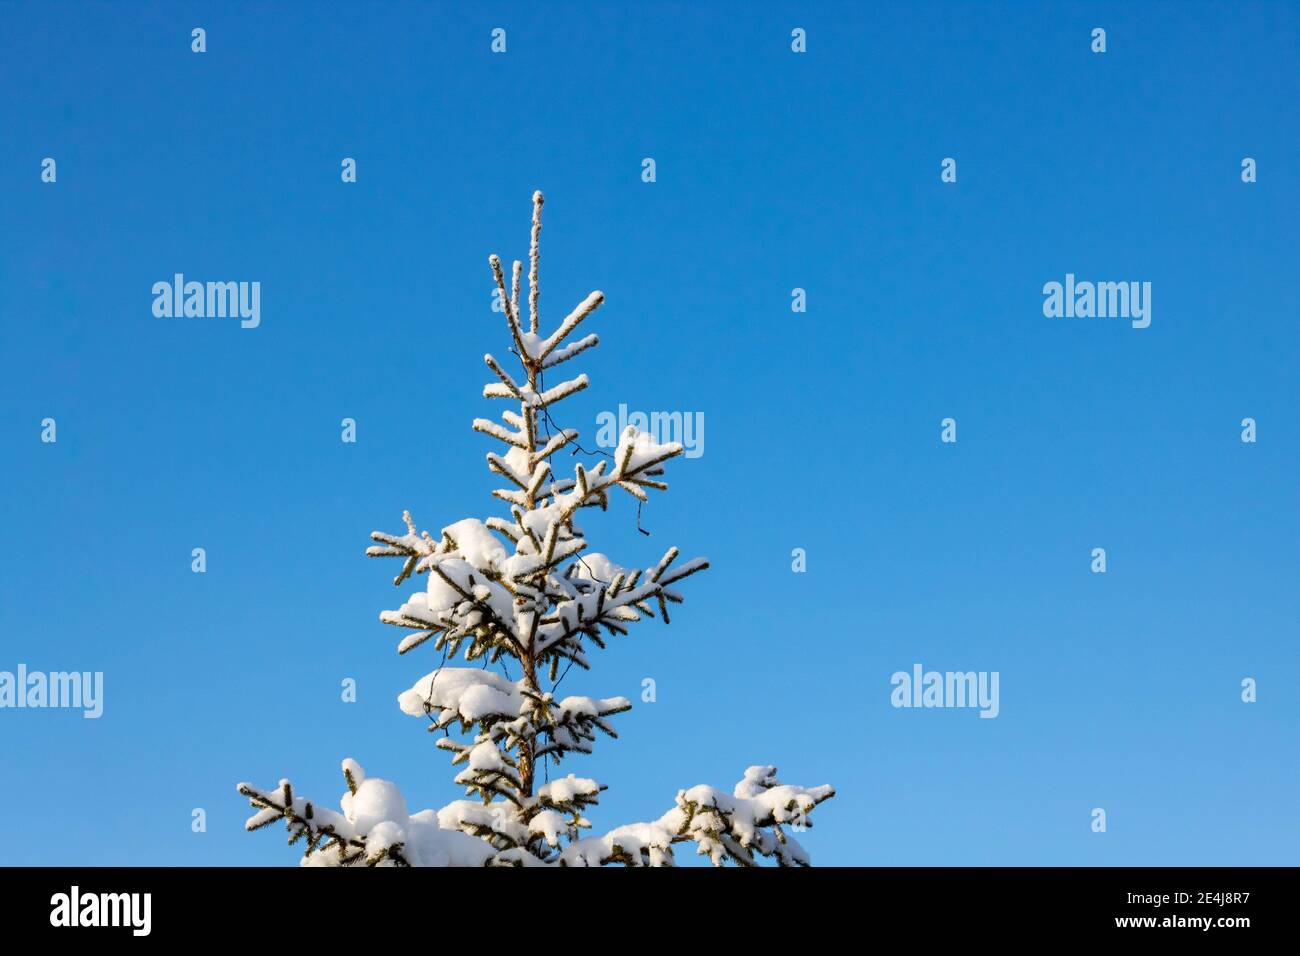 Beautiful Christmas tree covered with snow. Bottom view. Isolated against a blue sky. Close-up. Background. Landscape Stock Photo